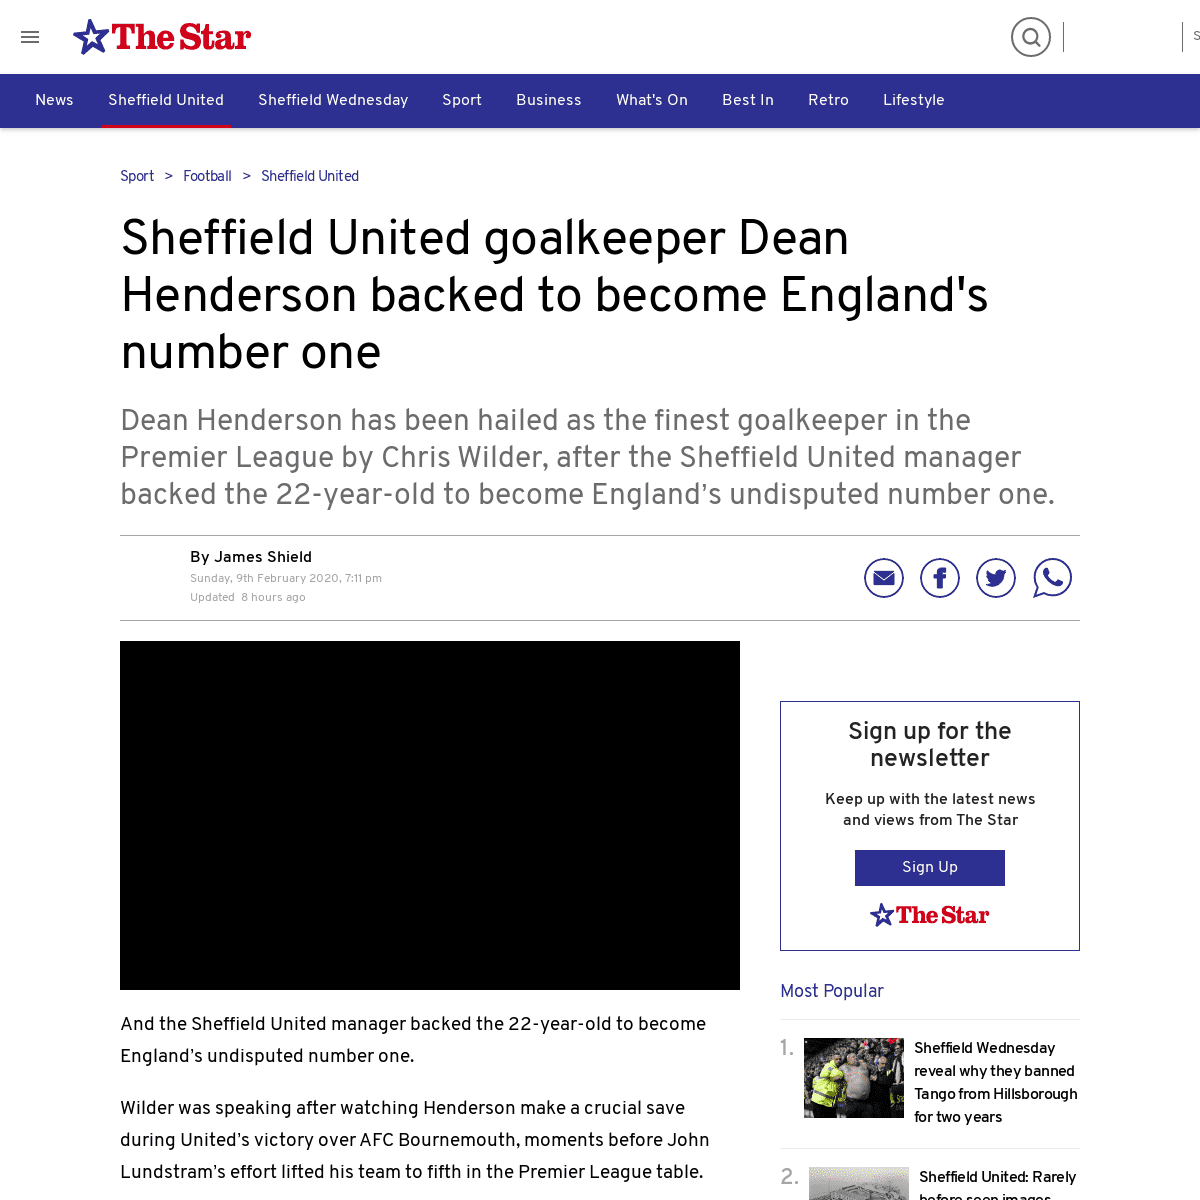 A complete backup of www.thestar.co.uk/sport/football/sheffield-united/sheffield-united-goalkeeper-dean-henderson-backed-become-